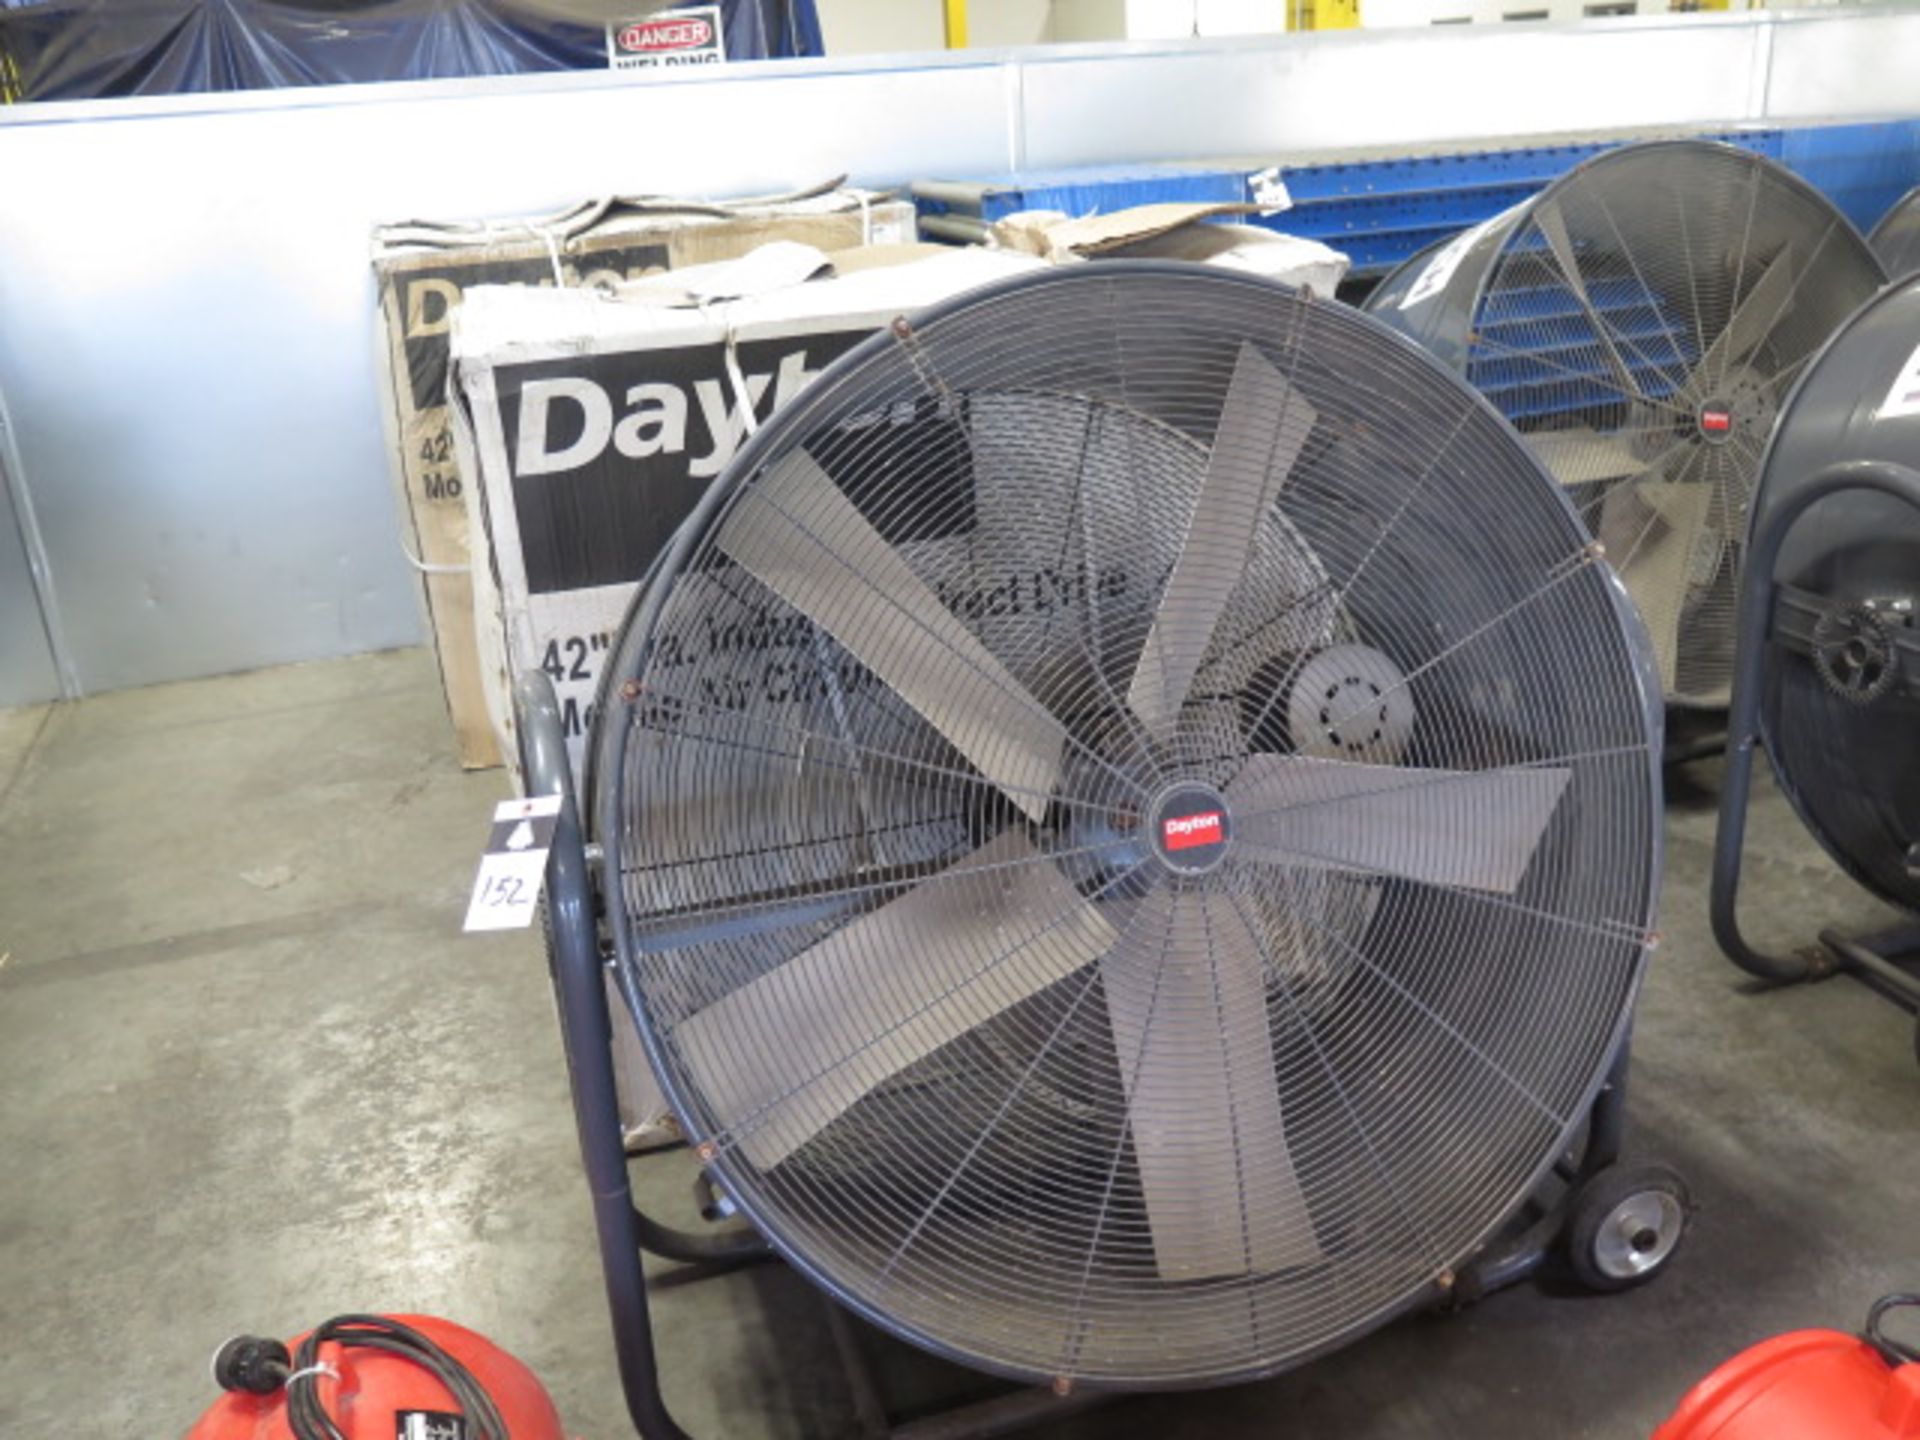 Dayton 42" Shop Fans (2) (1-NEW and 1-Used) (SOLD AS-IS - NO WARRANTY)